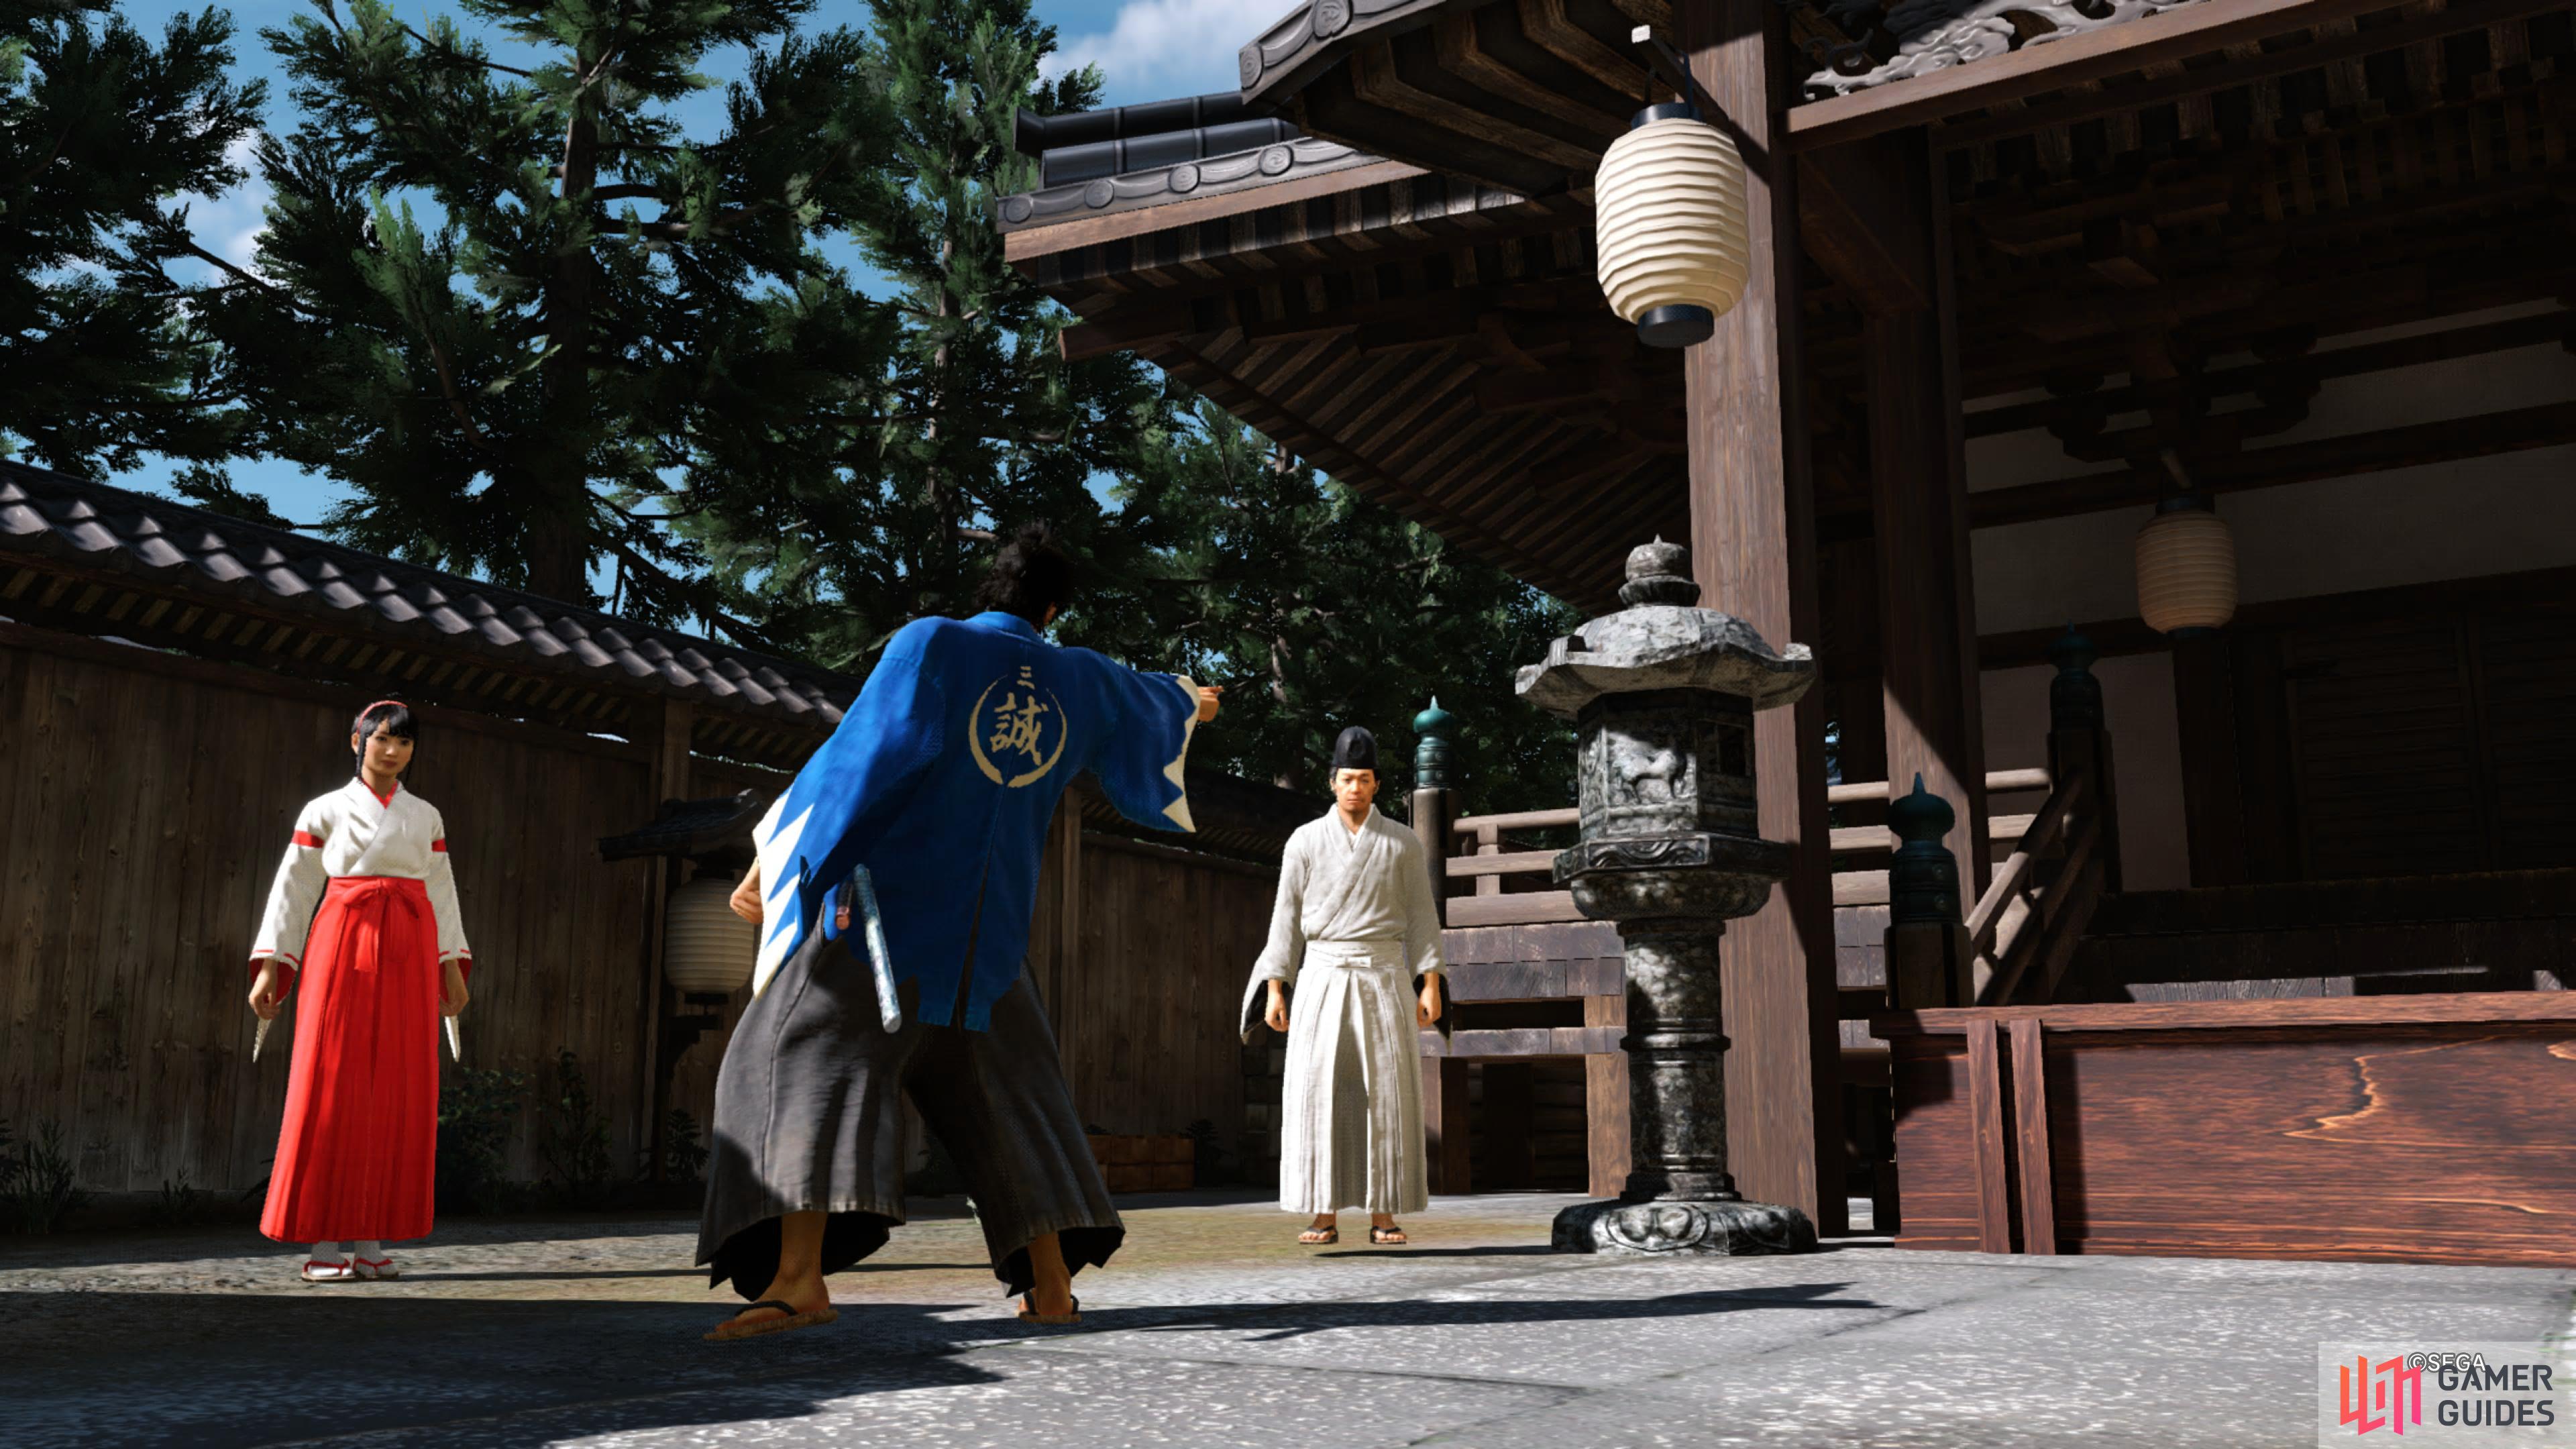 You can spend Virtue (currency) to purchase rare items from the Shinto Priest's Shop.